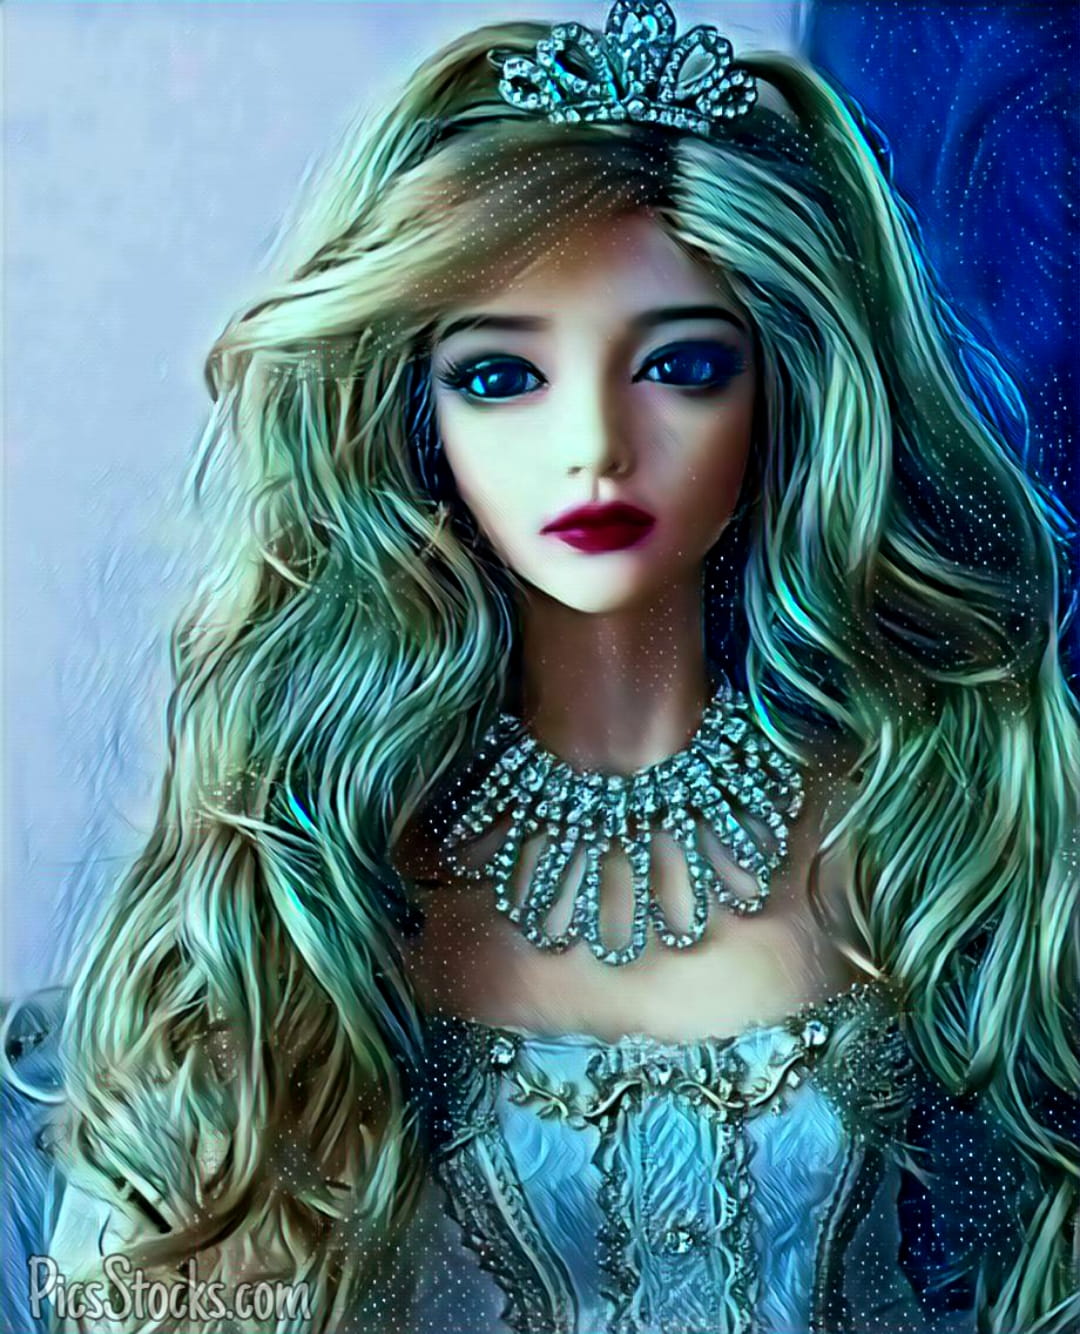 New Doll Images For Whatsapp Dp Offers Discounts, Save 40% | jlcatj.gob.mx